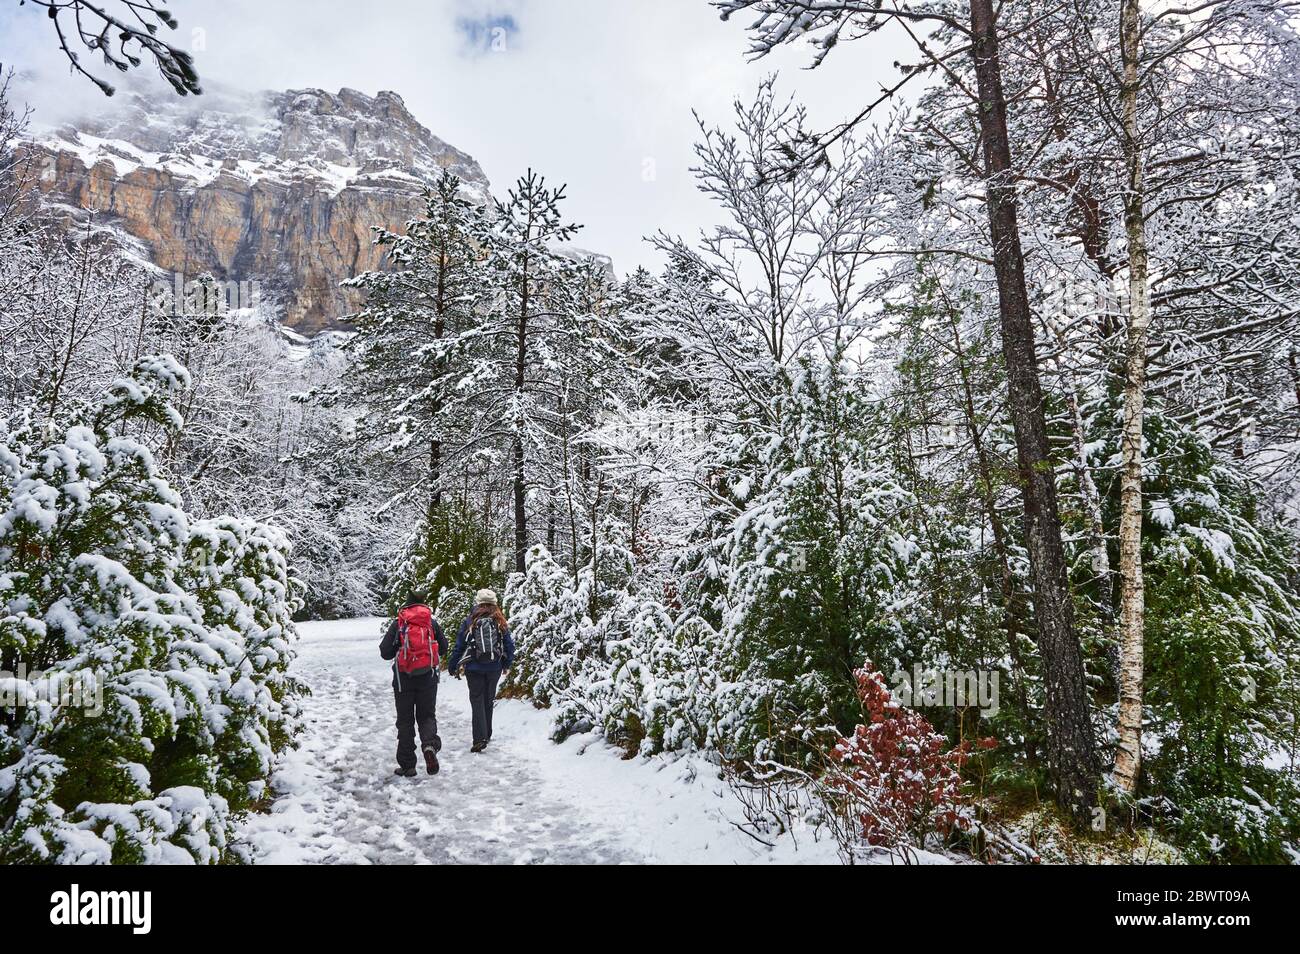 Pyrenees: Two women hiking along snowy path in the National park of Ordesa and Monte Perdido (Huesca province, Aragon region, Spain) Stock Photo